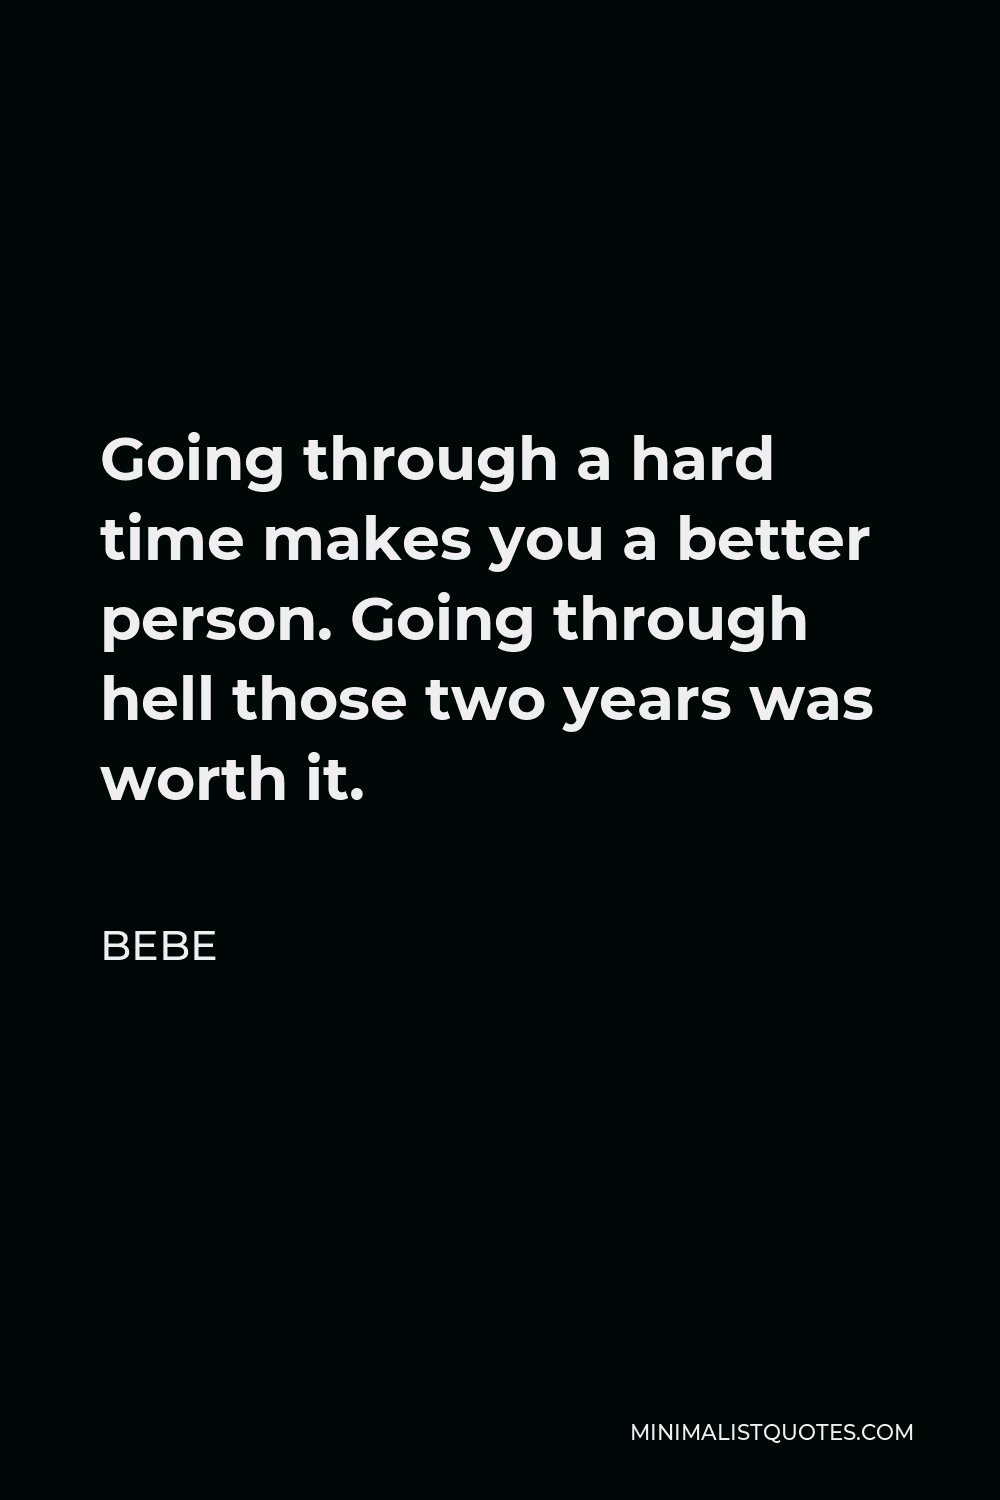 Bebe Quote - Going through a hard time makes you a better person. Going through hell those two years was worth it.